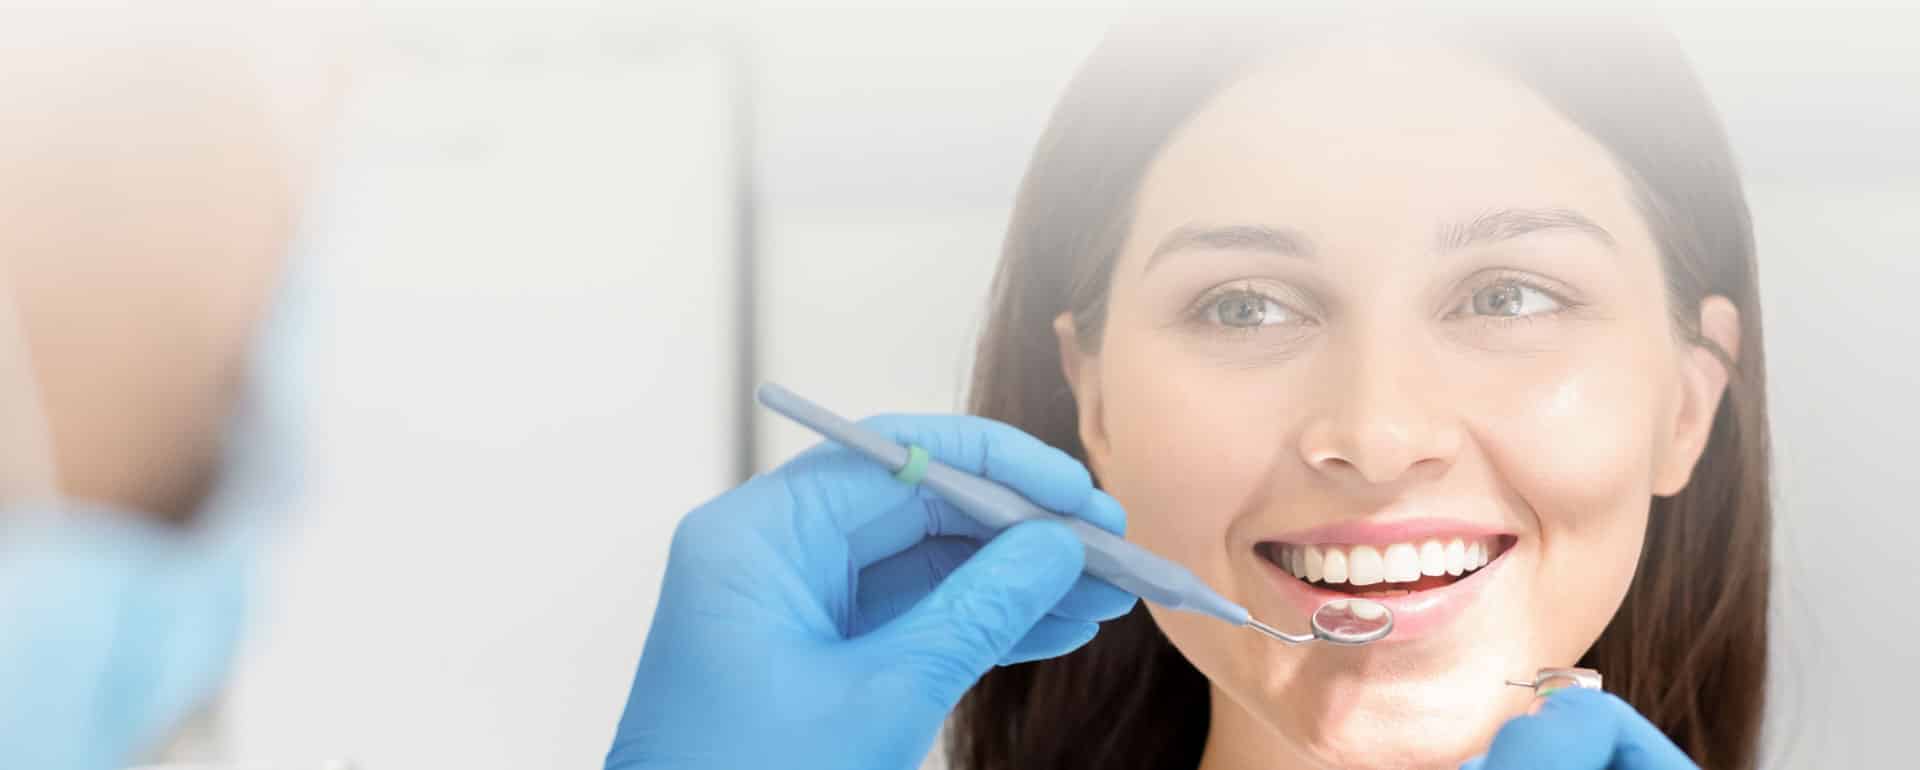 ABOUT FAMILY SMILES <br>DENTAL CARE